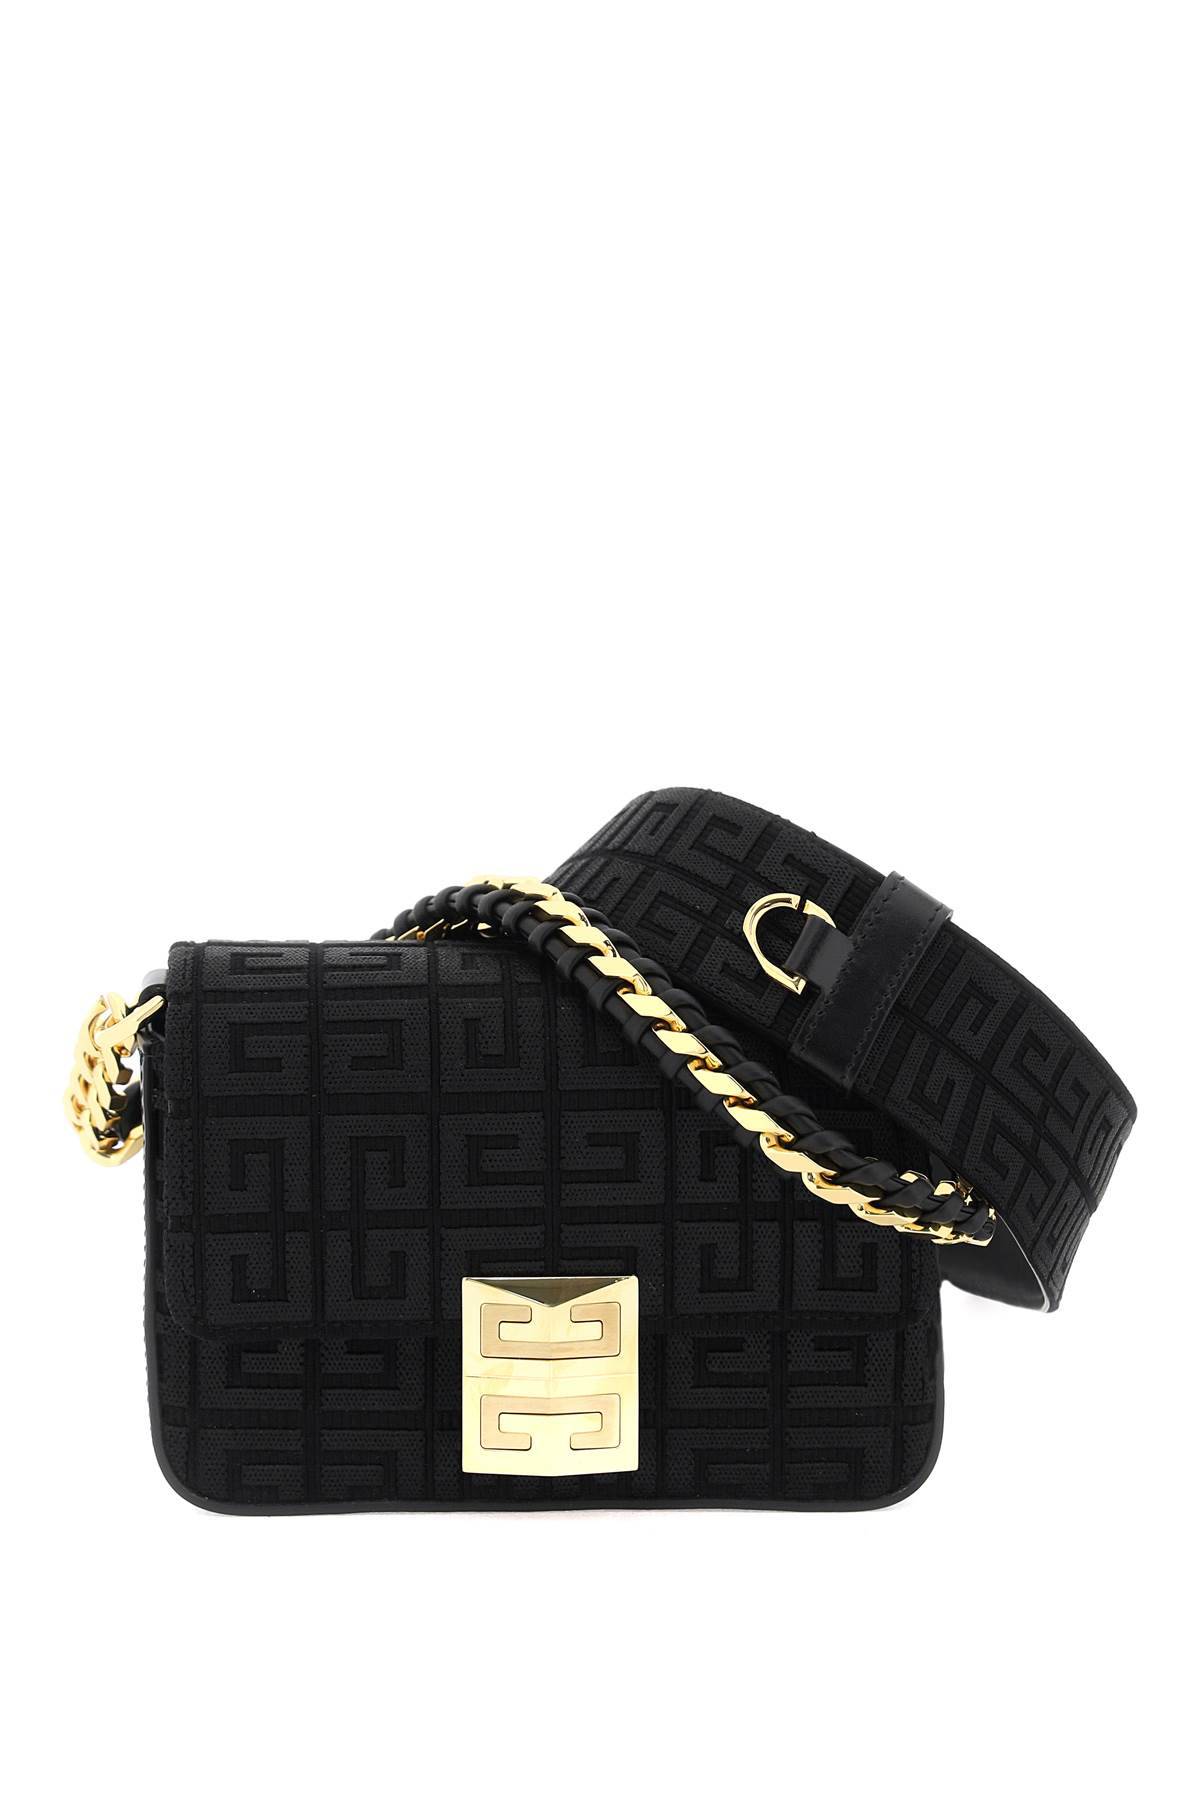 Givenchy GIVENCHY mini bag with embroidered 4g